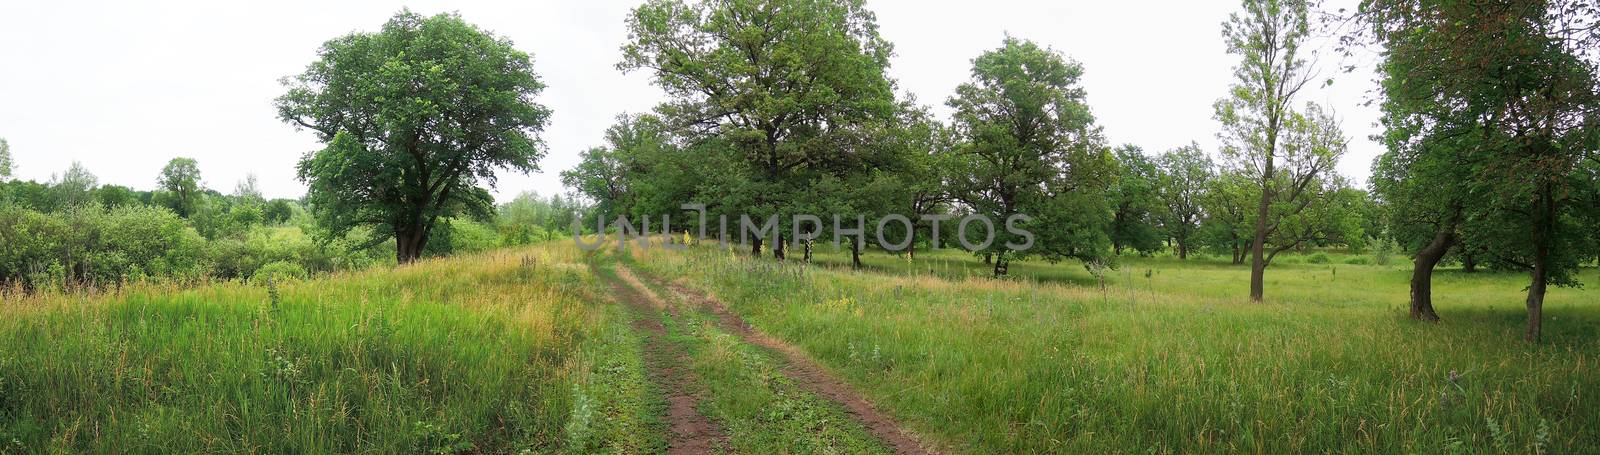 road leading through a meadow in the woods  by butenkow